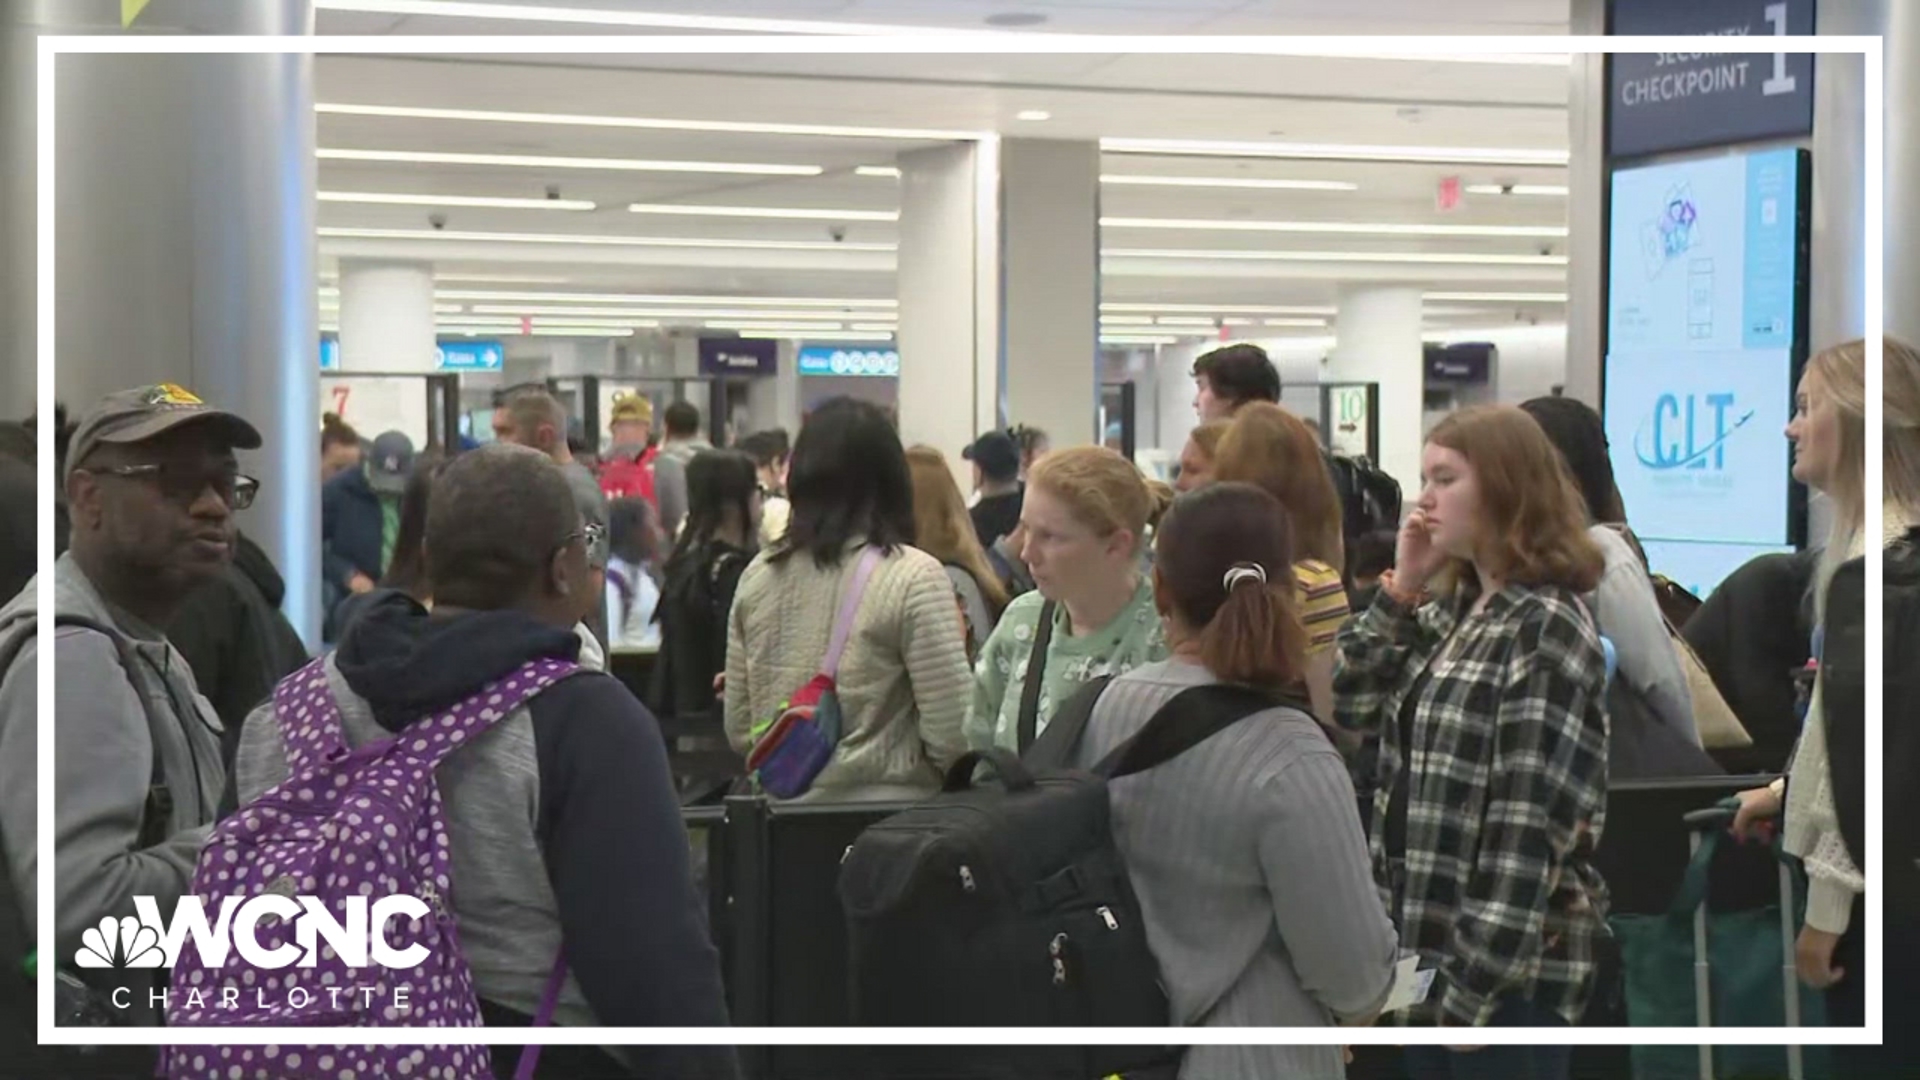 As what could be a record summer travel season starts for Charlotte Douglas International Airport, workers say they've already had enough.